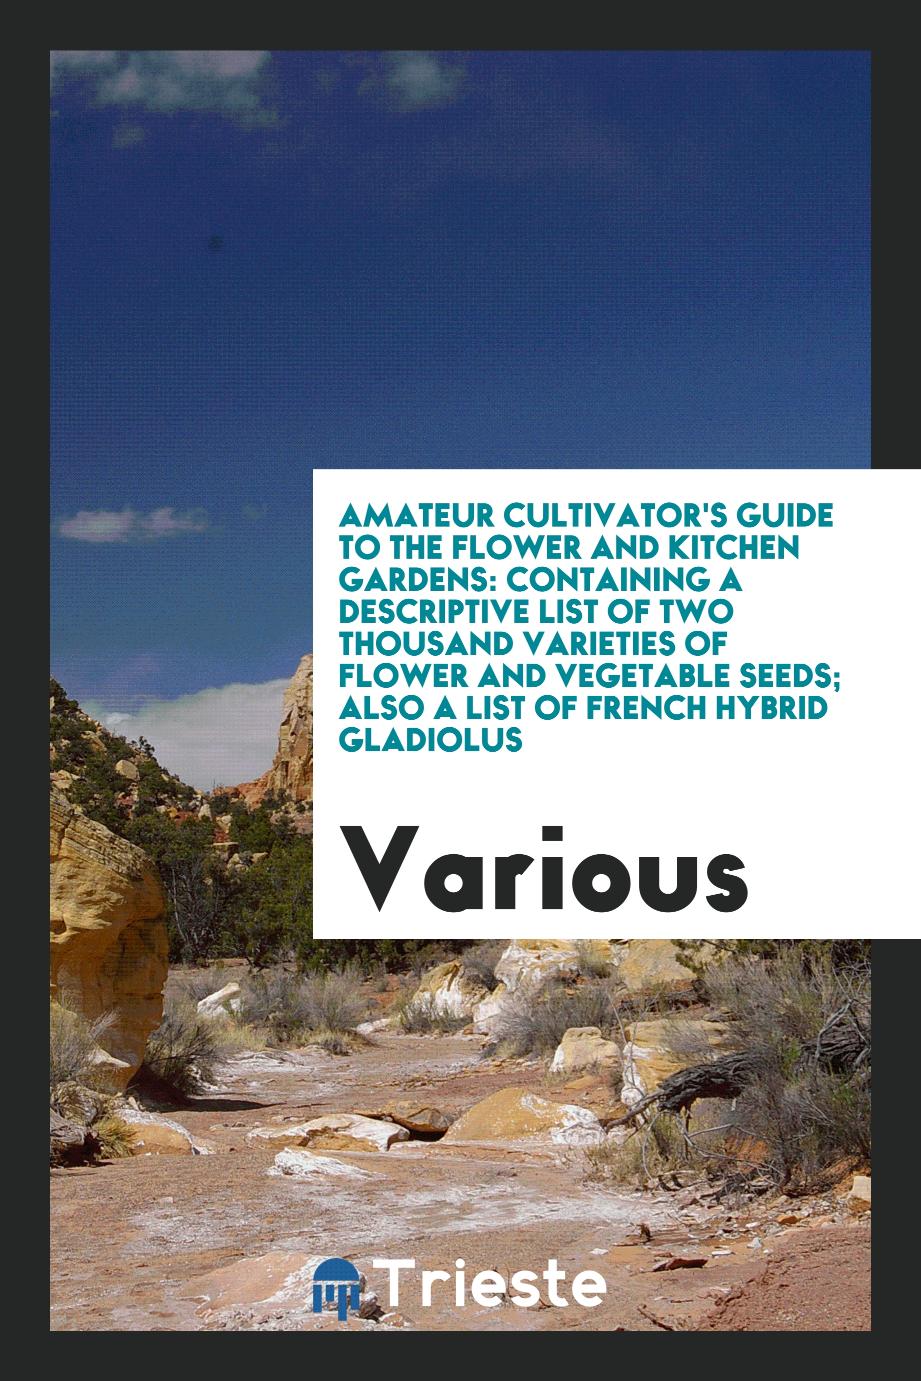 Amateur cultivator's guide to the flower and kitchen gardens: containing a descriptive list of two thousand varieties of flower and vegetable seeds; also a list of French hybrid gladiolus